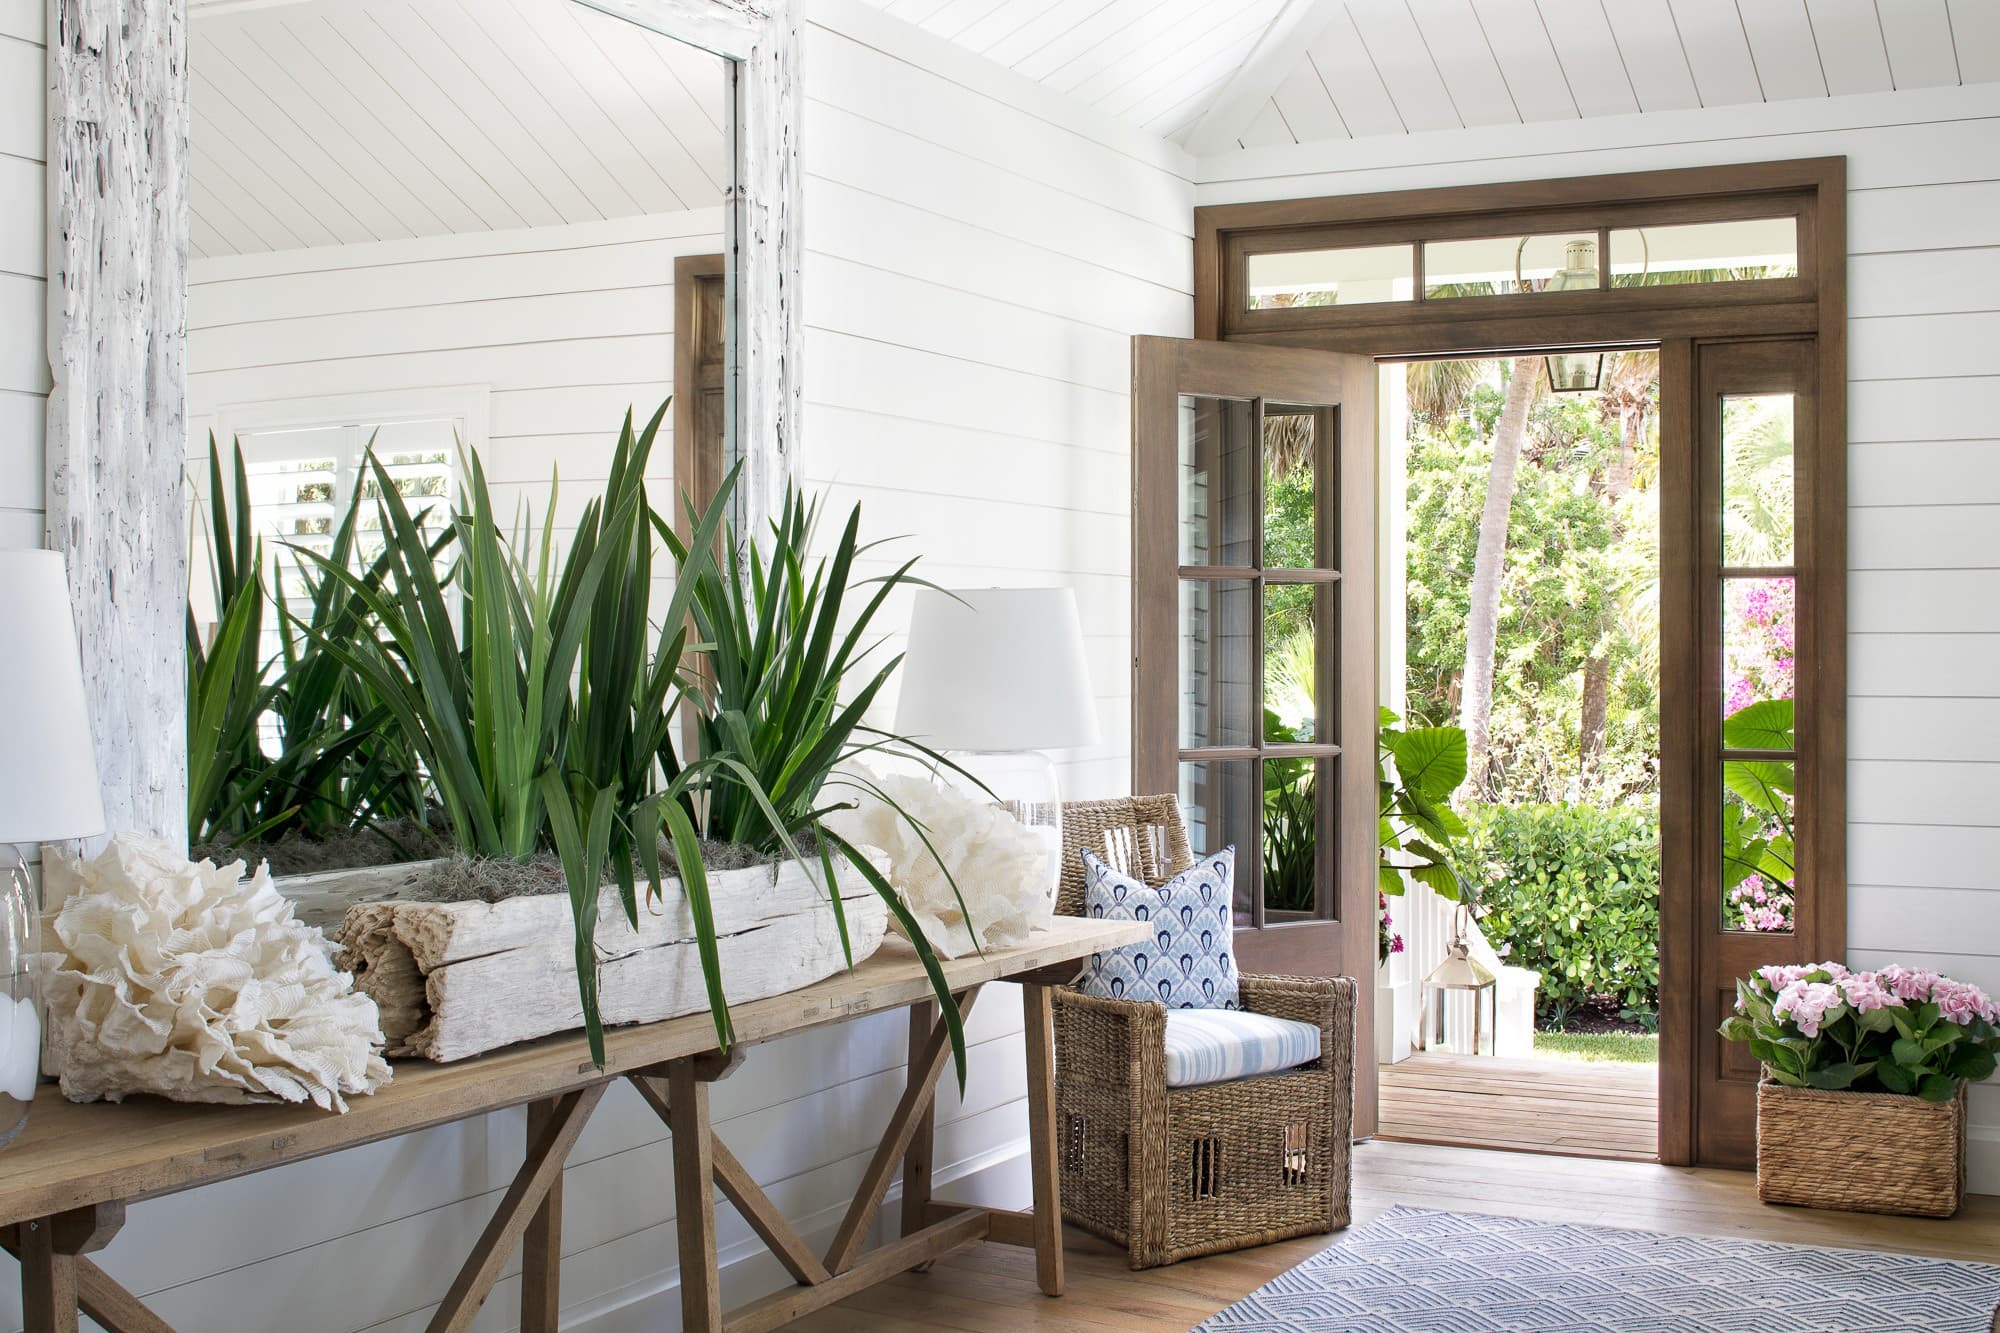 Big Impact Decor: 10 Entryway Ideas for Medium and Small Spaces